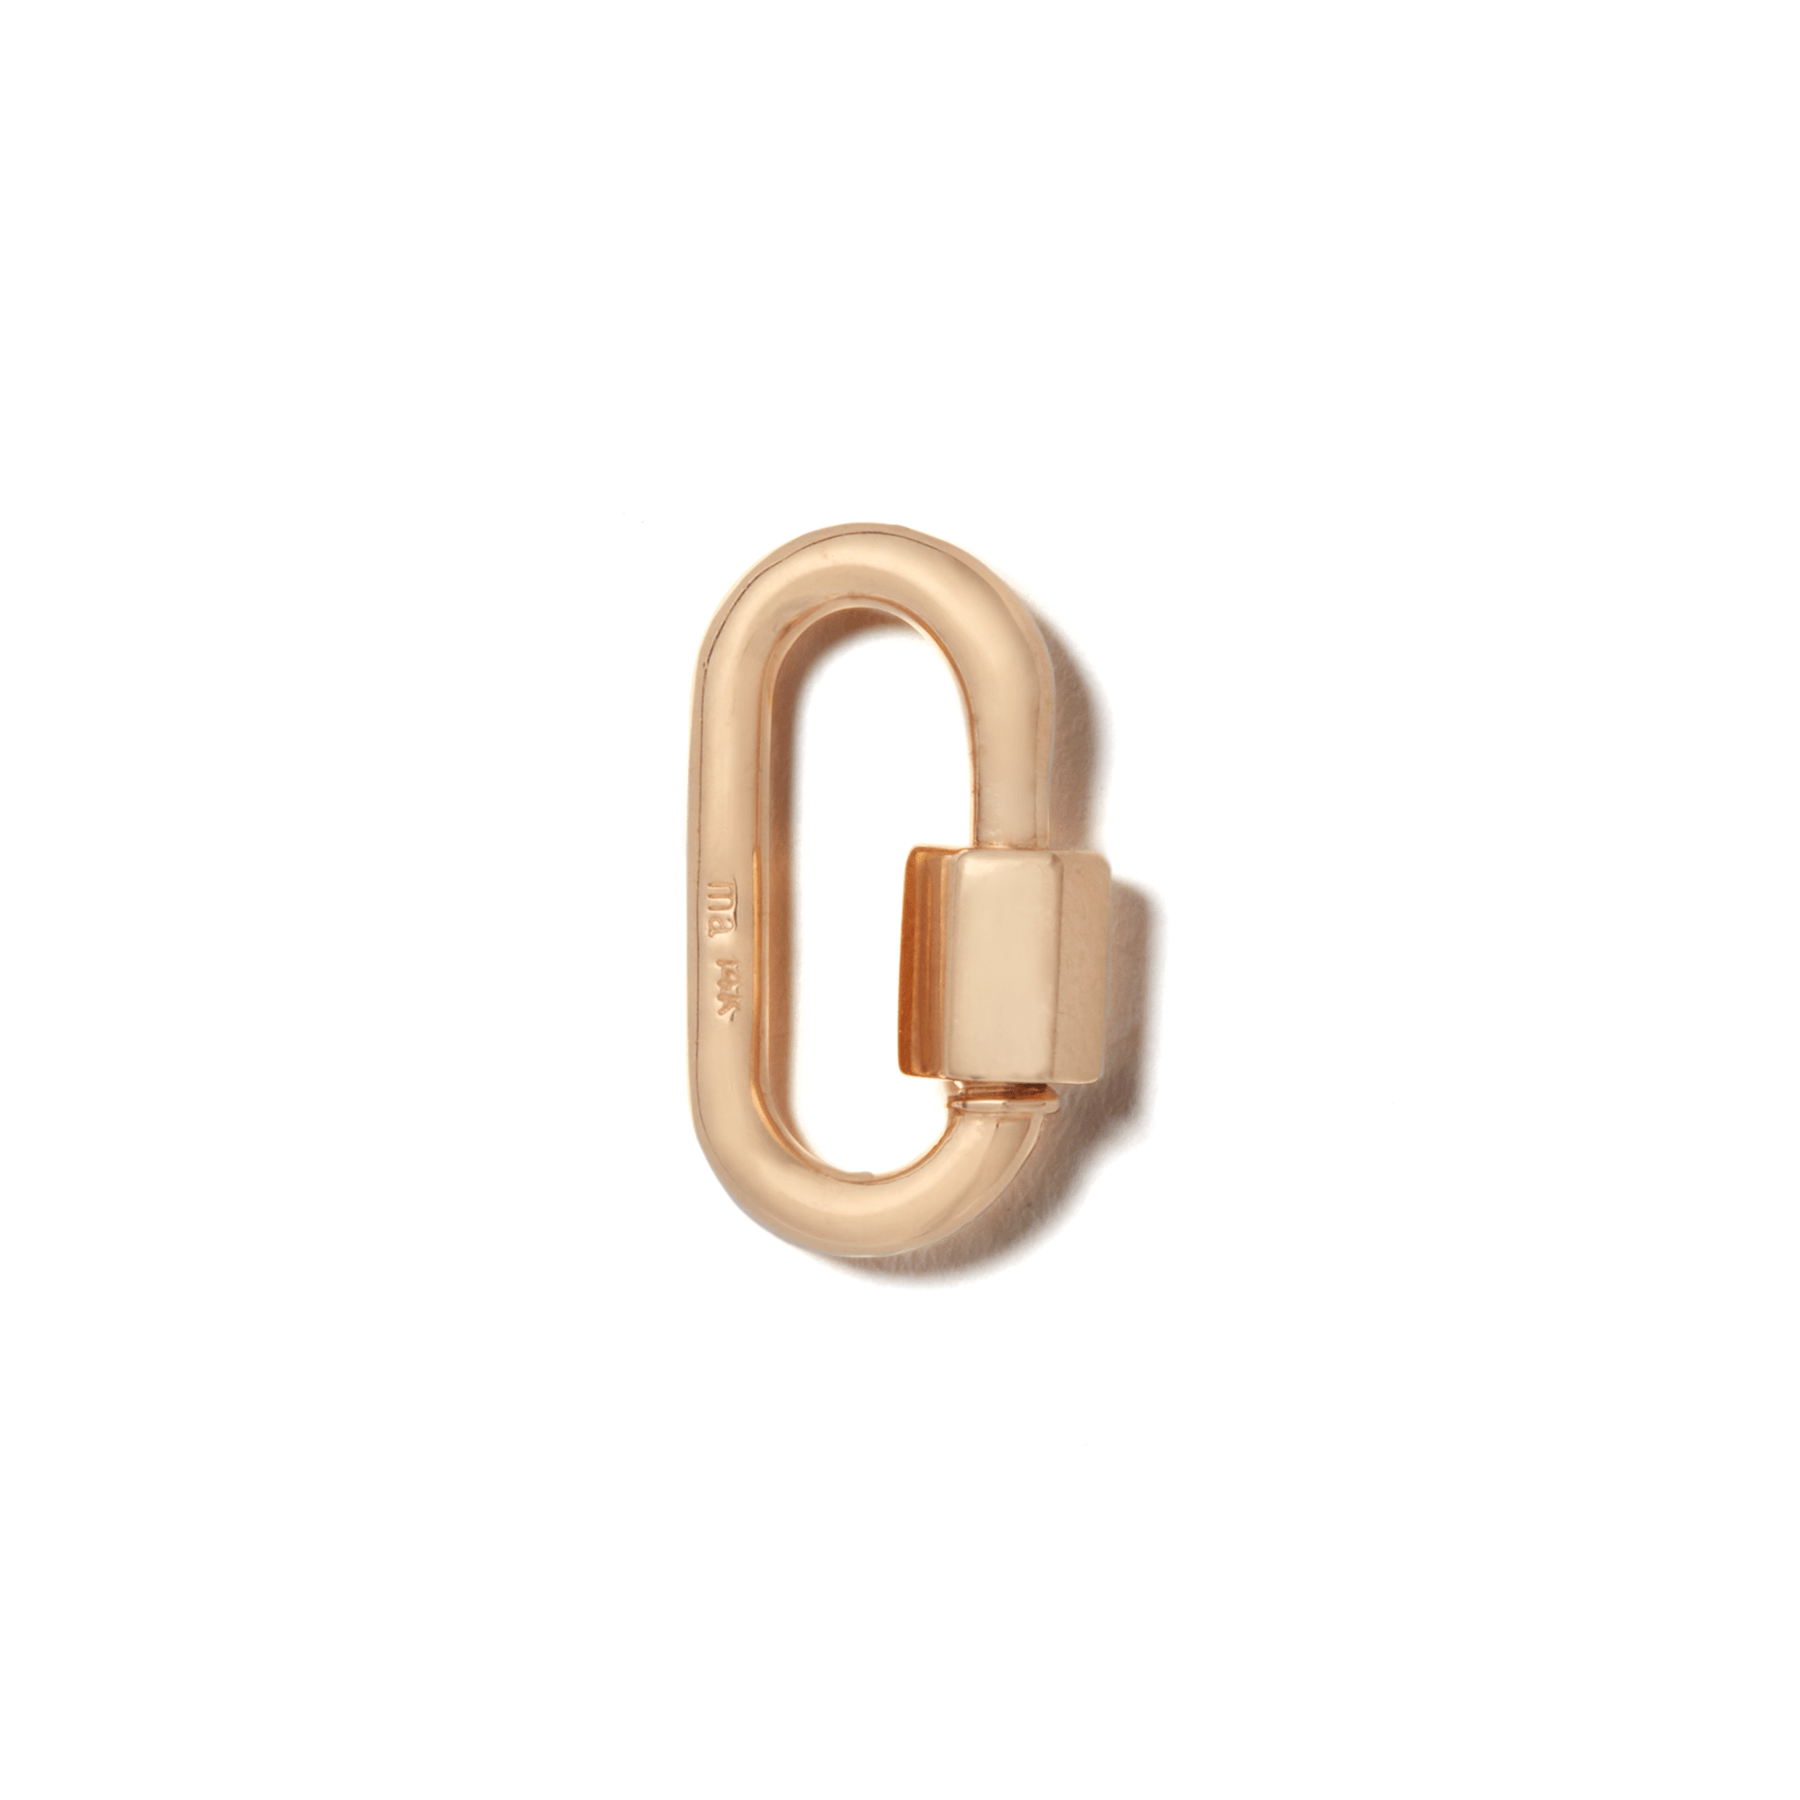 Rose gold small gold lock with closed clasp